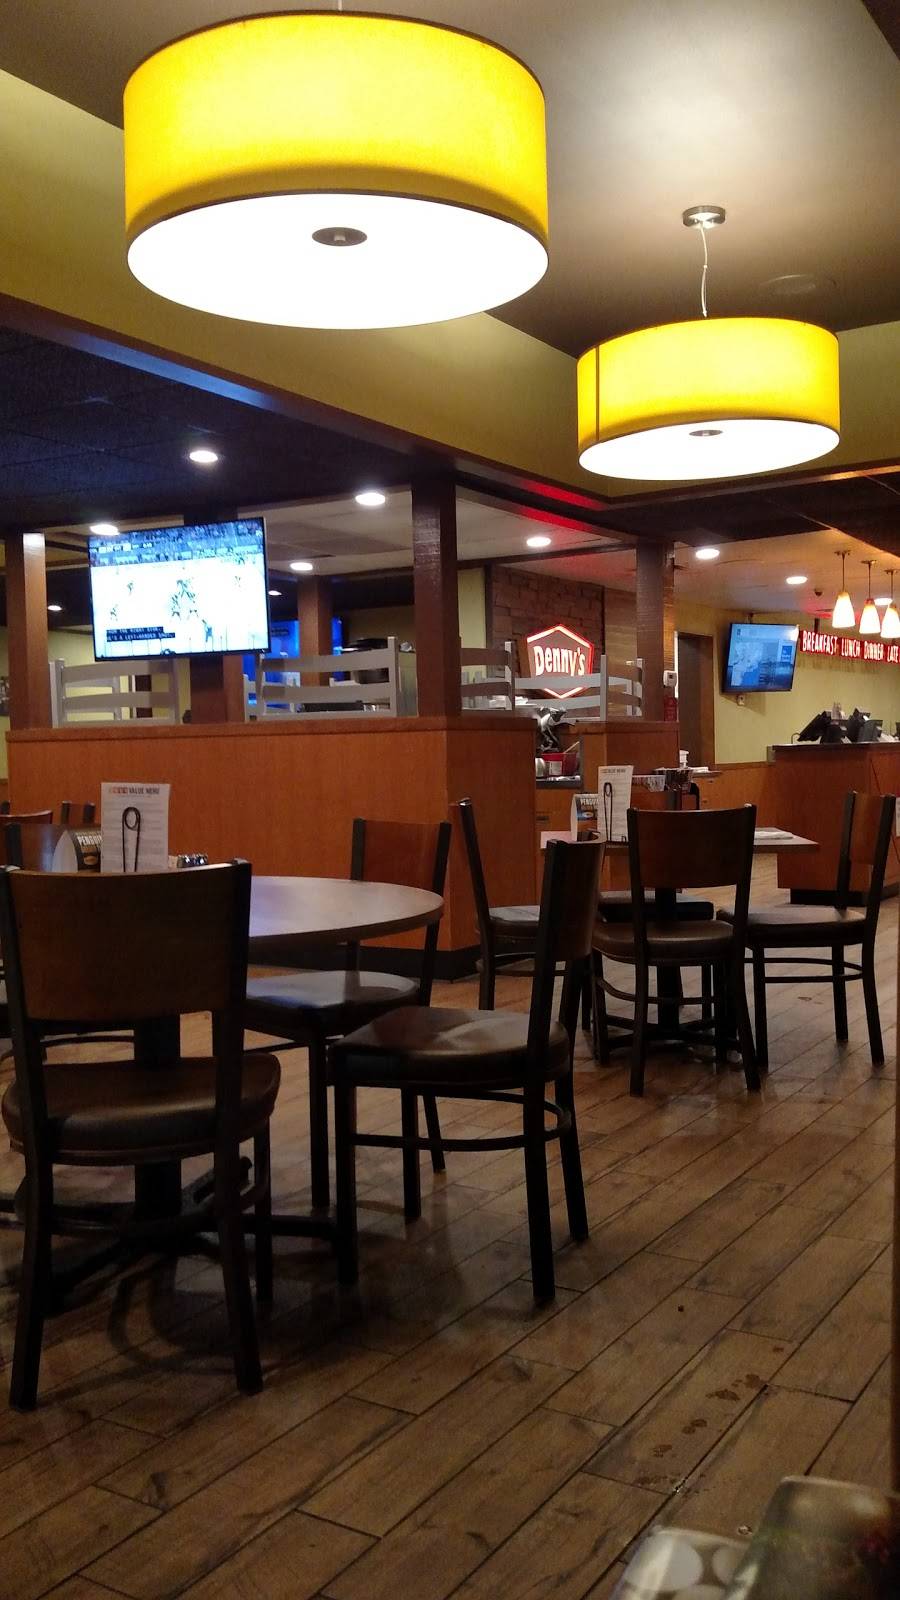 Dennys | restaurant | 1829 Lincoln Hwy, North Versailles, PA 15137, USA | 4128243340 OR +1 412-824-3340